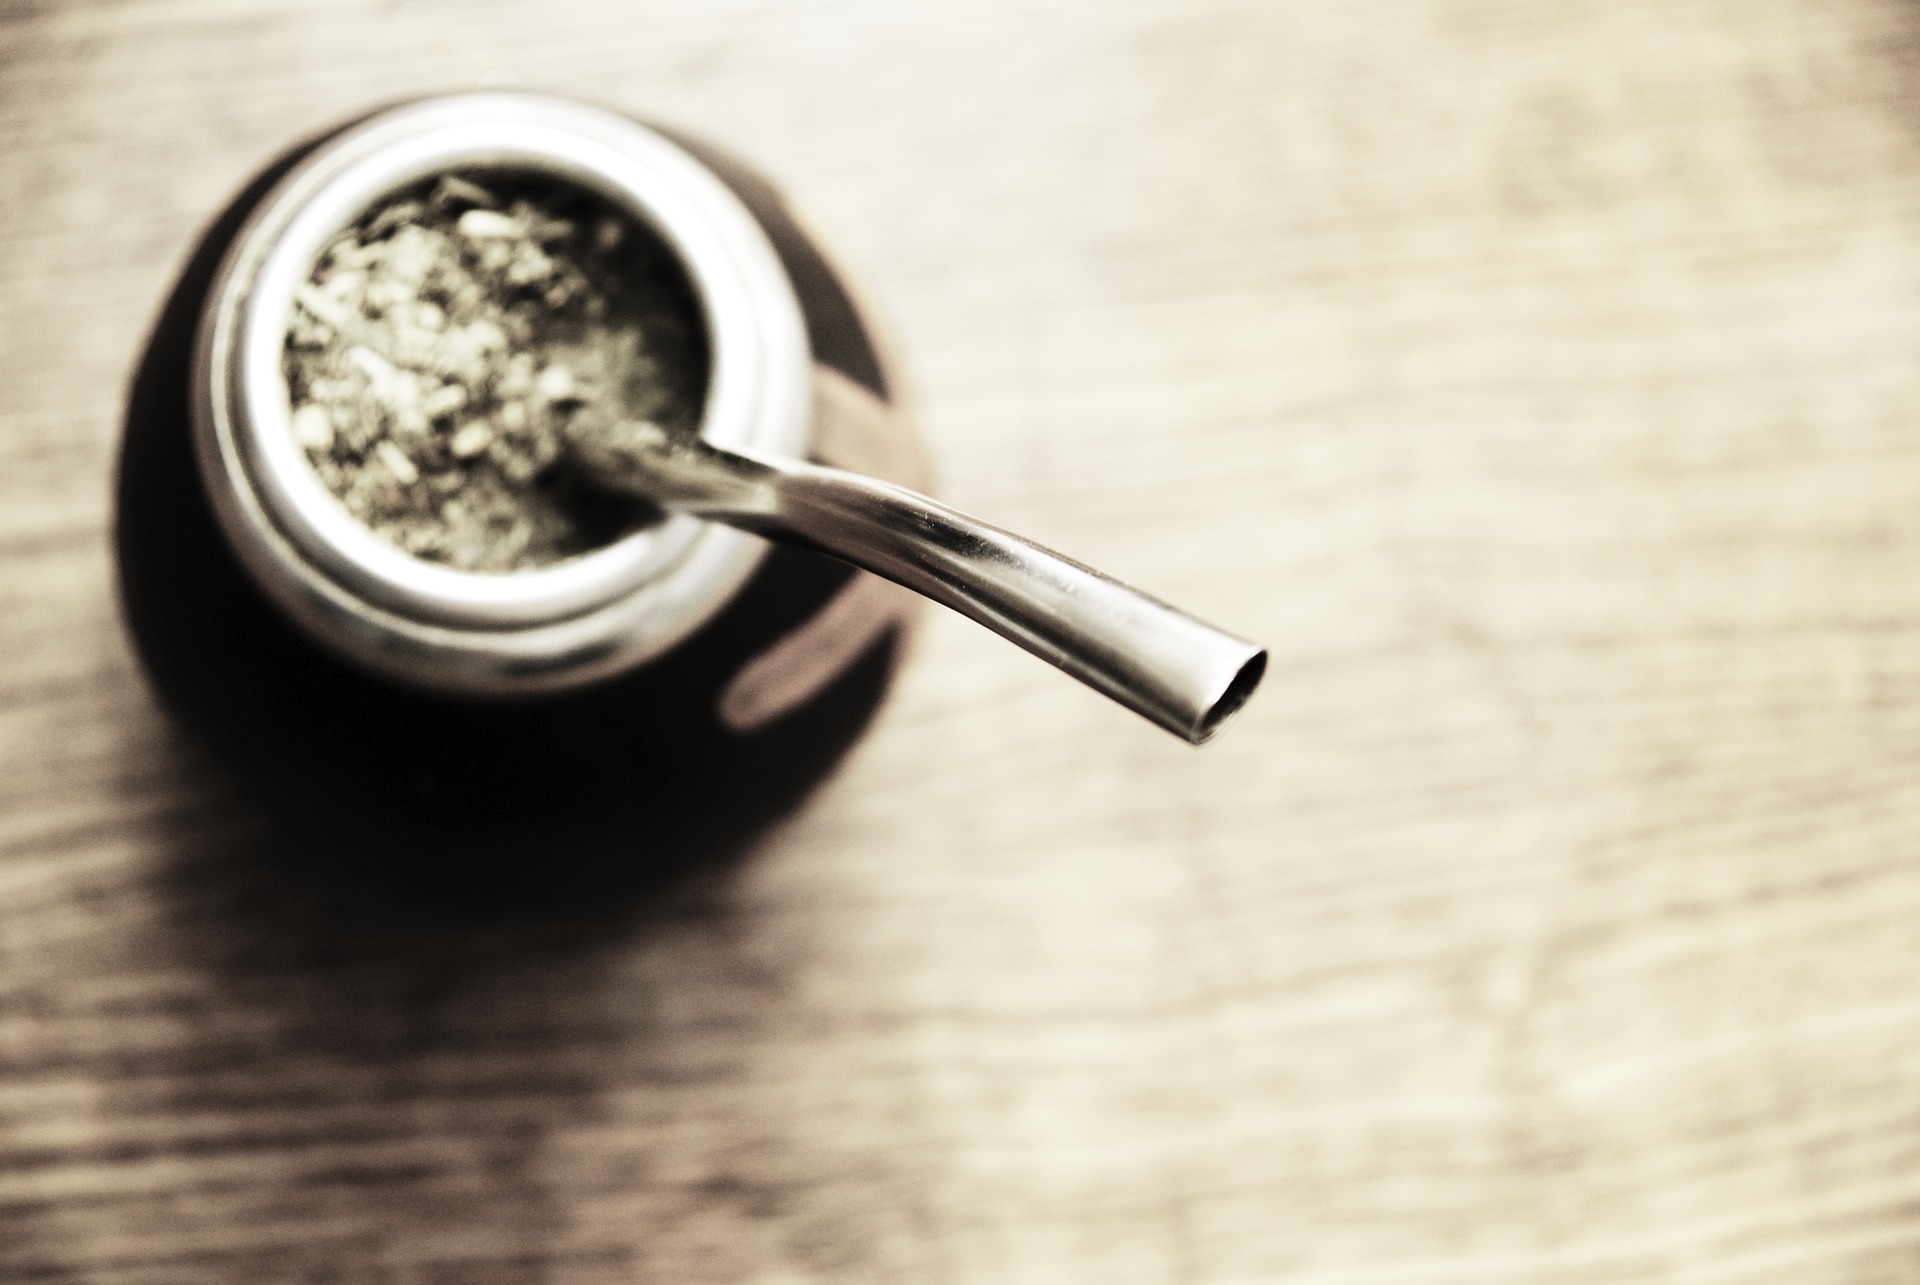 Types of Bombillas for Drinking Mate - The Yerba Mate Blog